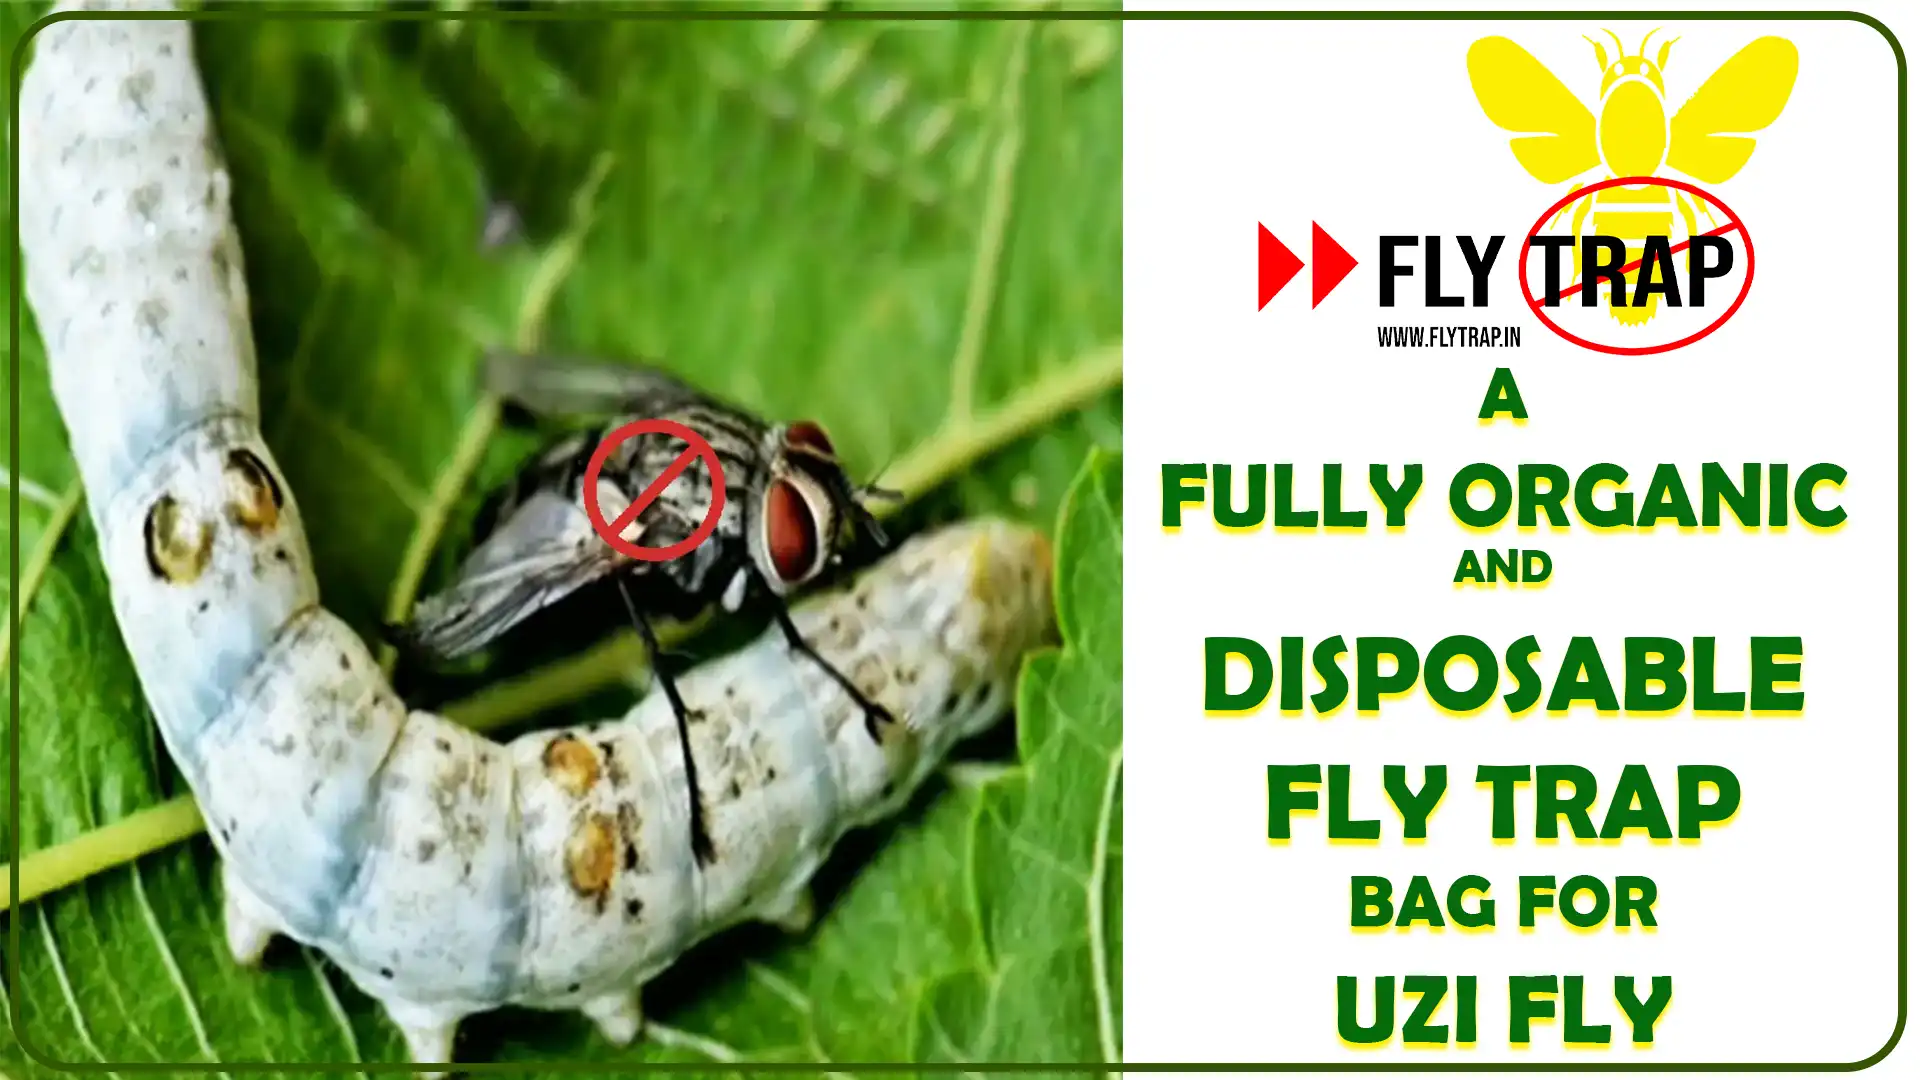 Organic Disposable Fly Trap Bag for Uzi Fly